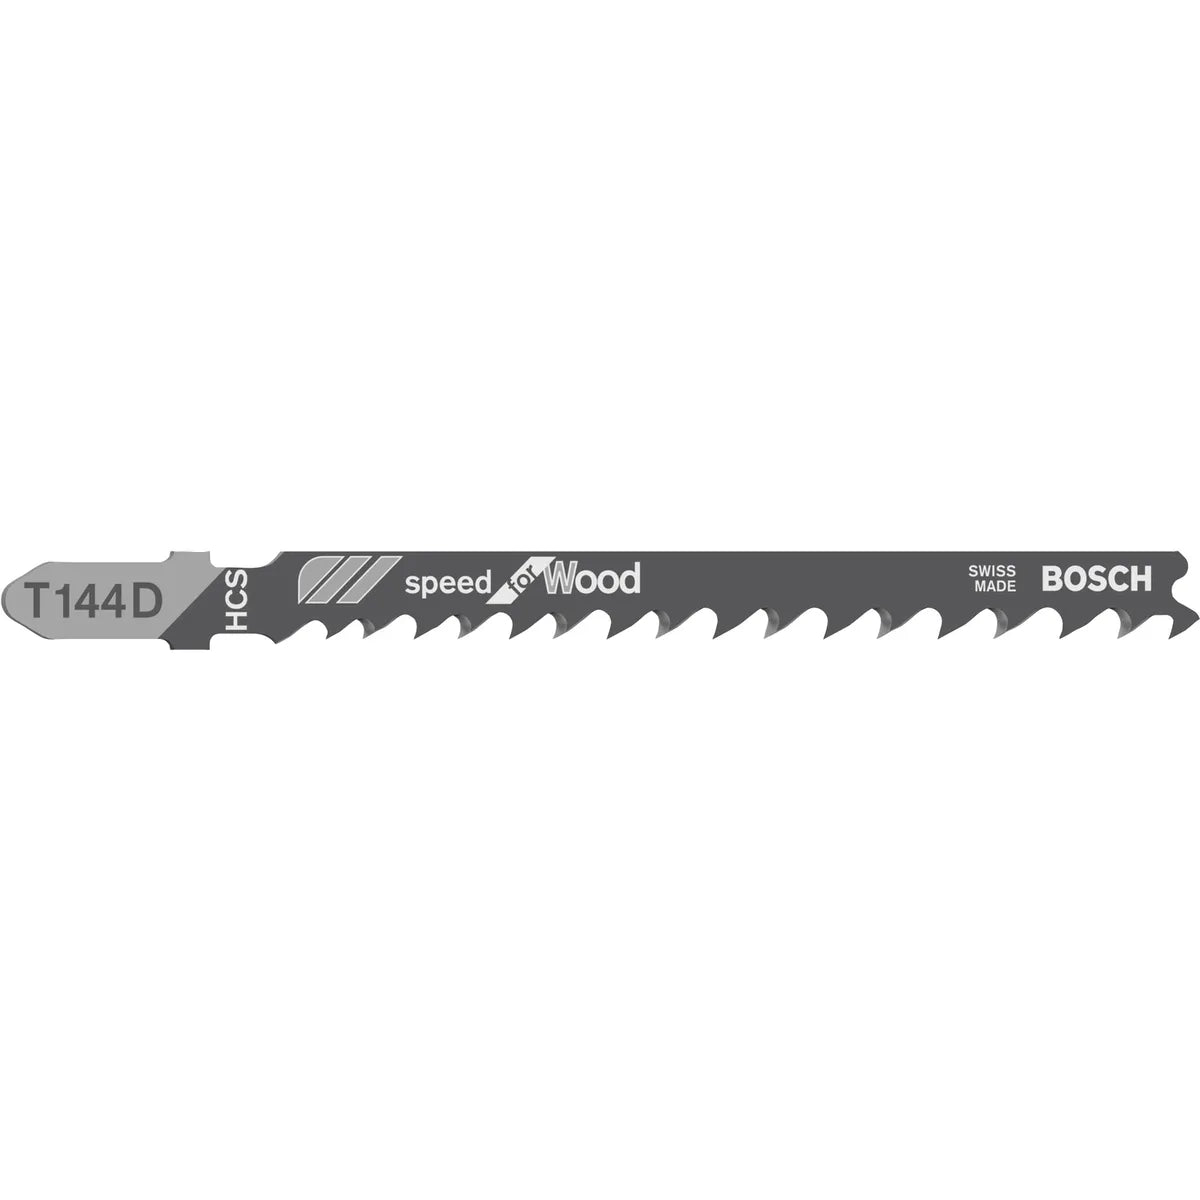 Bosch Jigsaw Blades T 144 D Speed for Wood 100 Pack 2608637880 Power Tool Services